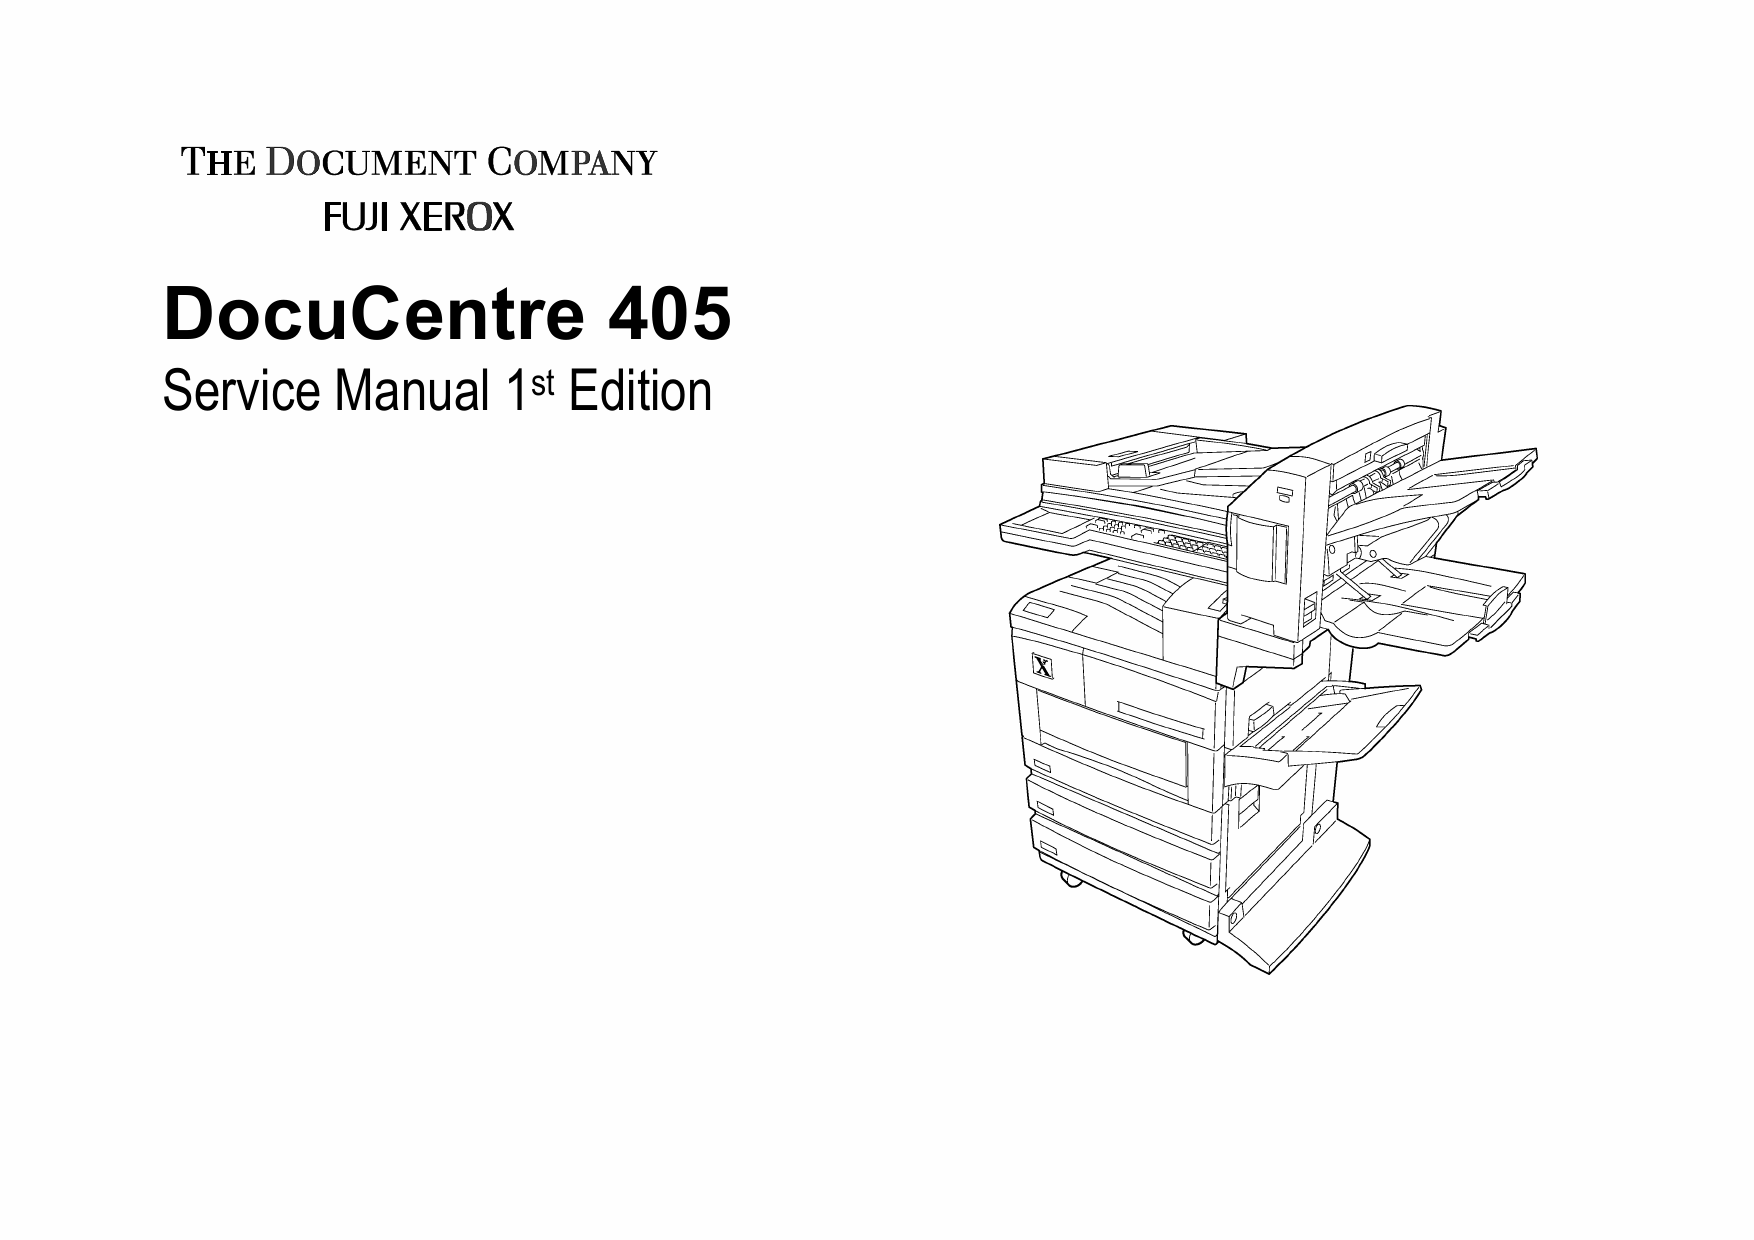 Xerox DocuCentre 405 Parts List and Service Manual-1